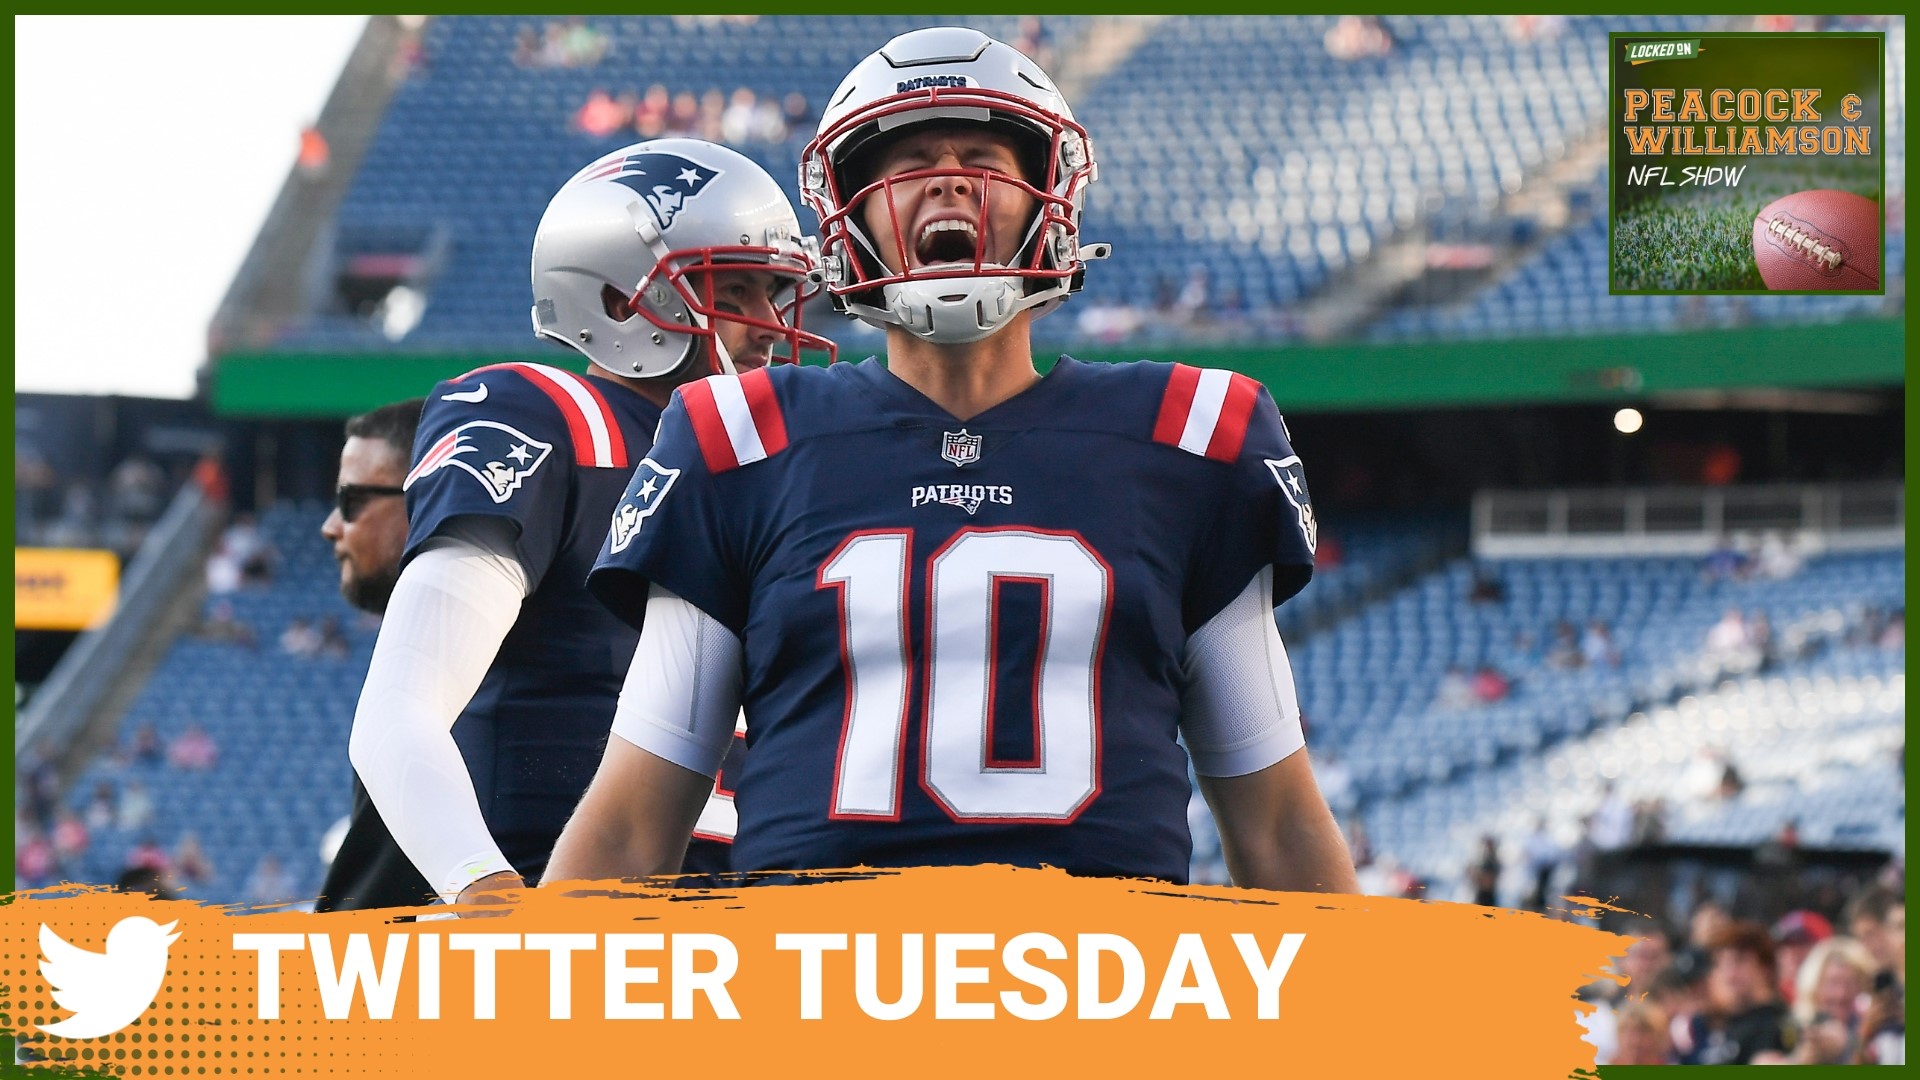 Brian Peacock and Matt Williamson break down the latest in the NFL including cut down day and roster moves, as well as answer your Twitter questions on teams.